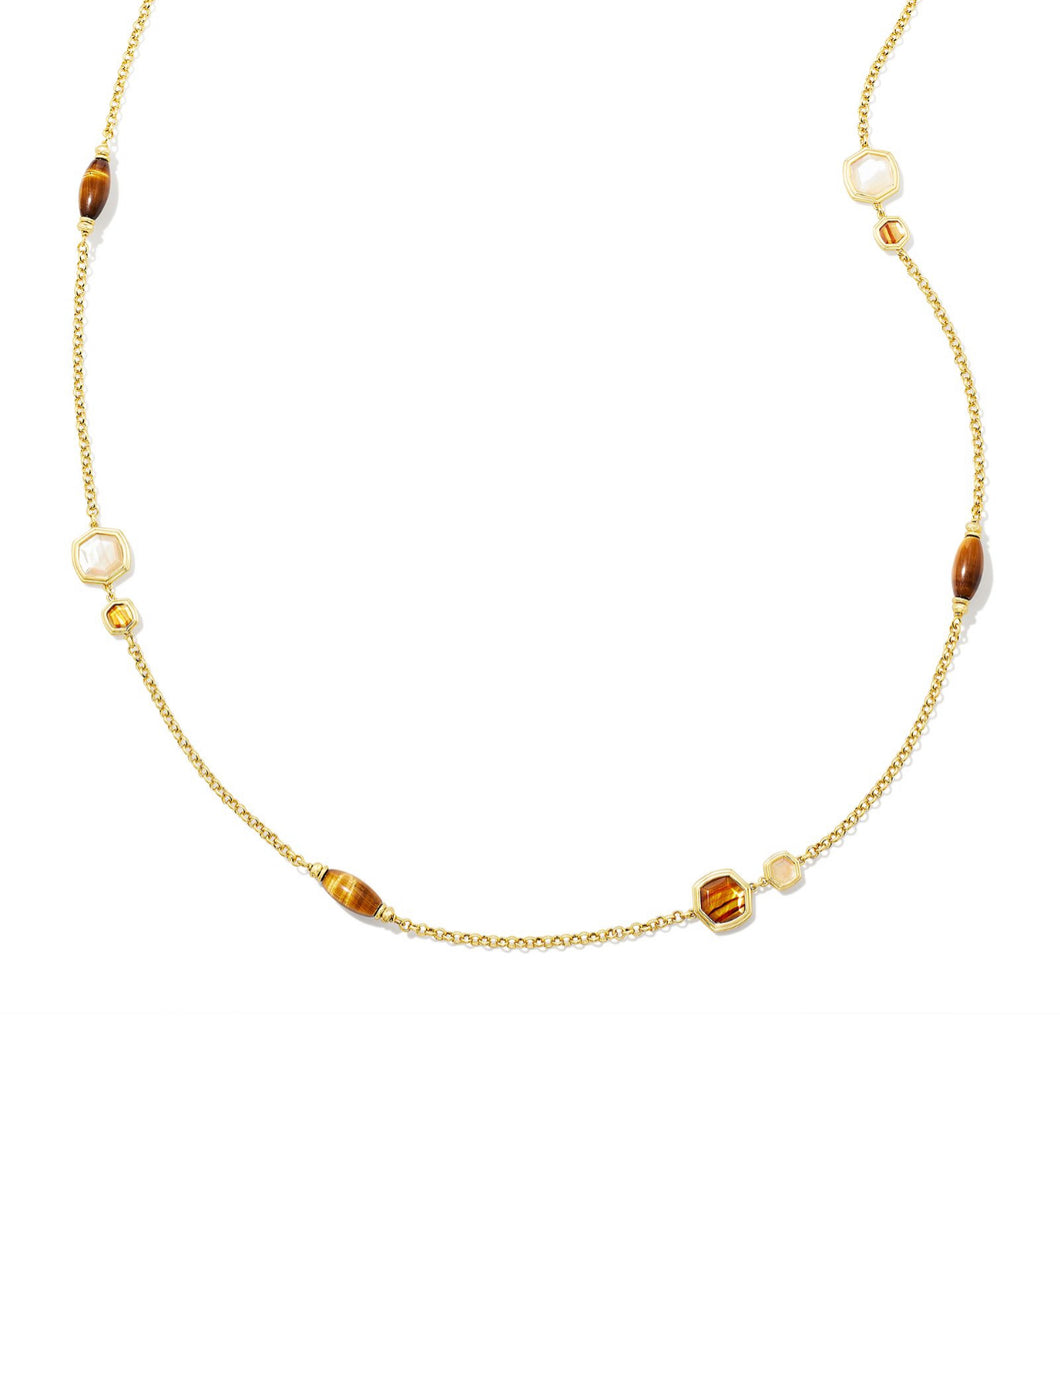 Kendra Scott: Monica Long Strand Necklace in Gold Brown Mix